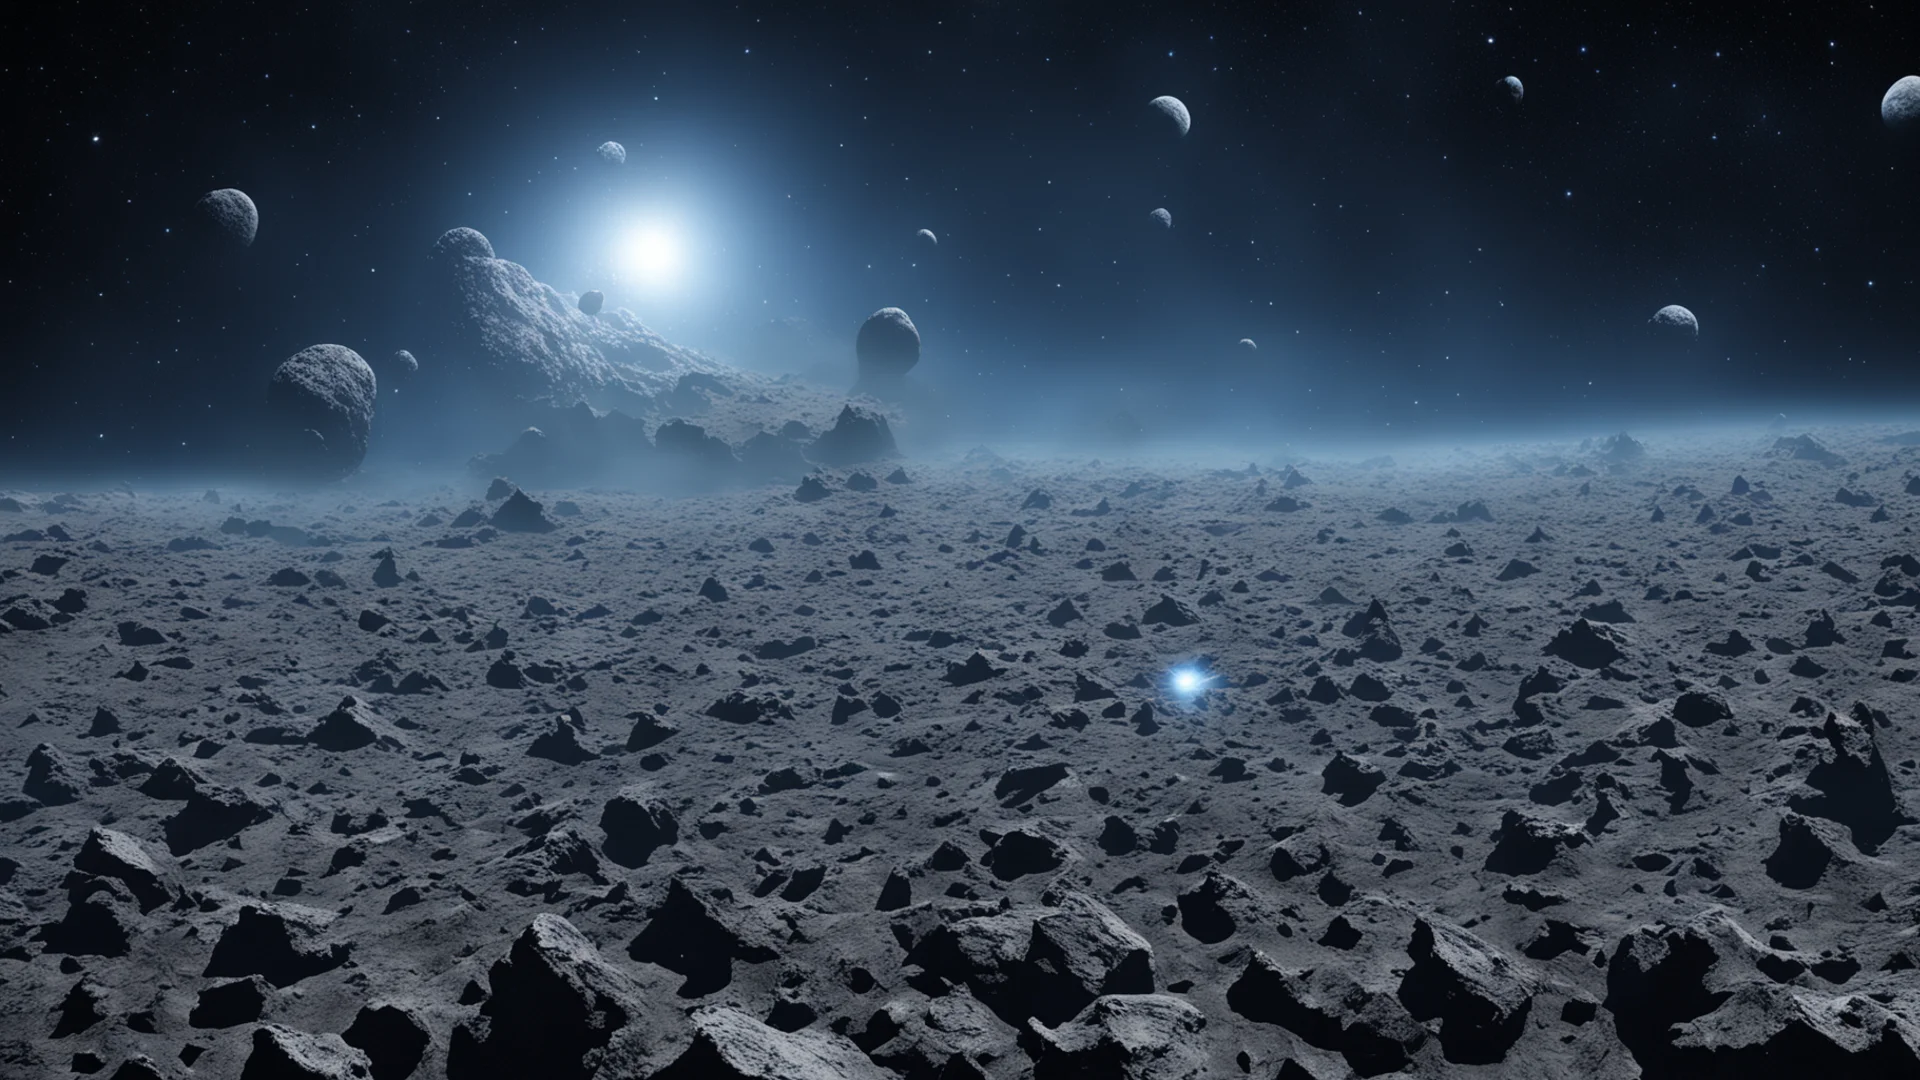 aiamazing blue and grey asteroid field awesome portrait 2 wide